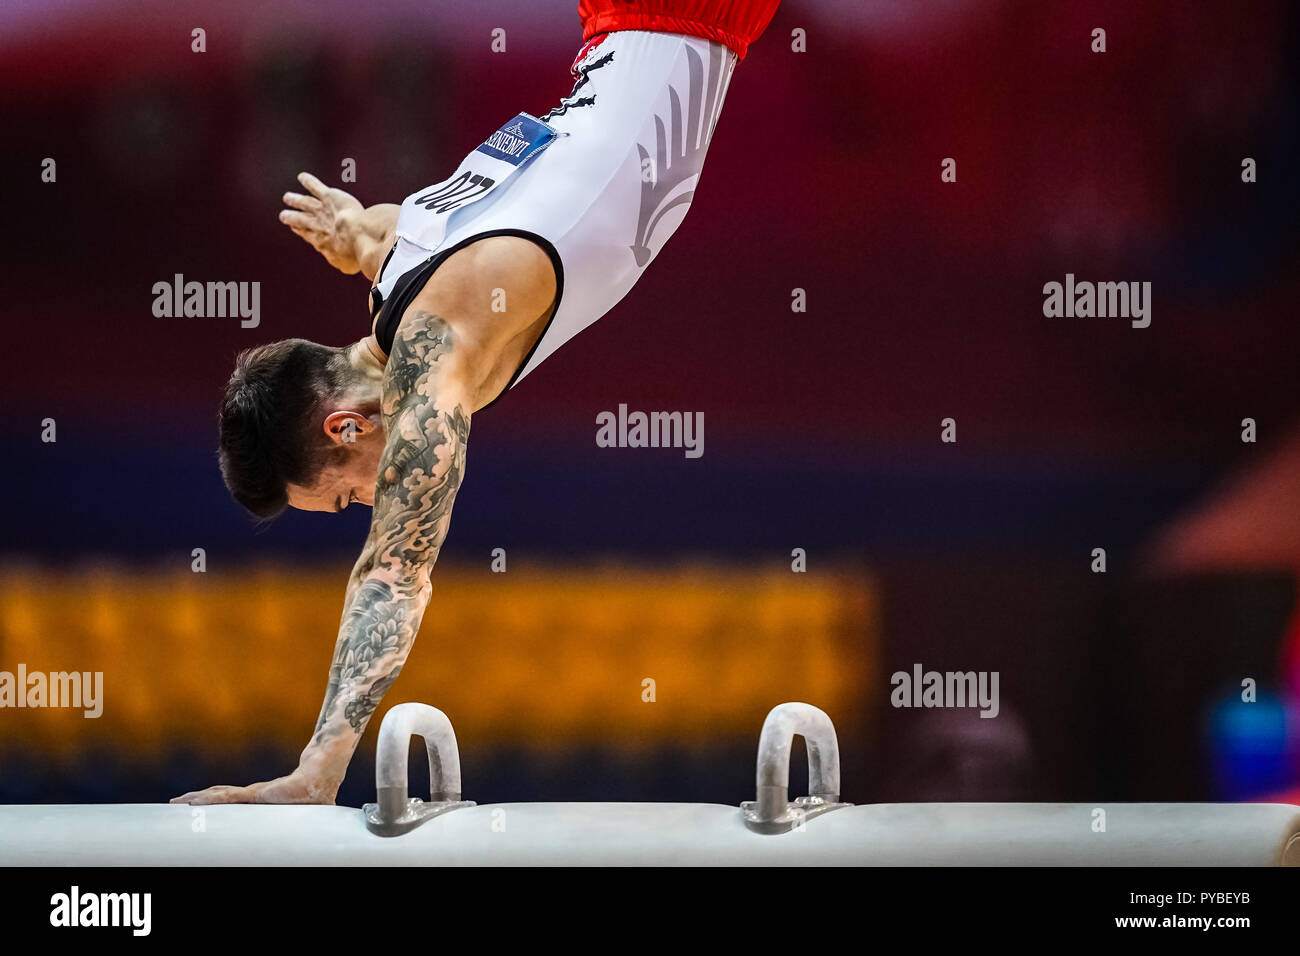 Doha, Qatar. 26th Oct 2018. October 26, 2018: Marcel Nguyen of Germany during Pommel Horse qualification at the Aspire Dome in Doha, Qatar, Artistic FIG Gymnastics World Championships. Ulrik Pedersen/CSM Credit: Cal Sport Media/Alamy Live News Stock Photo